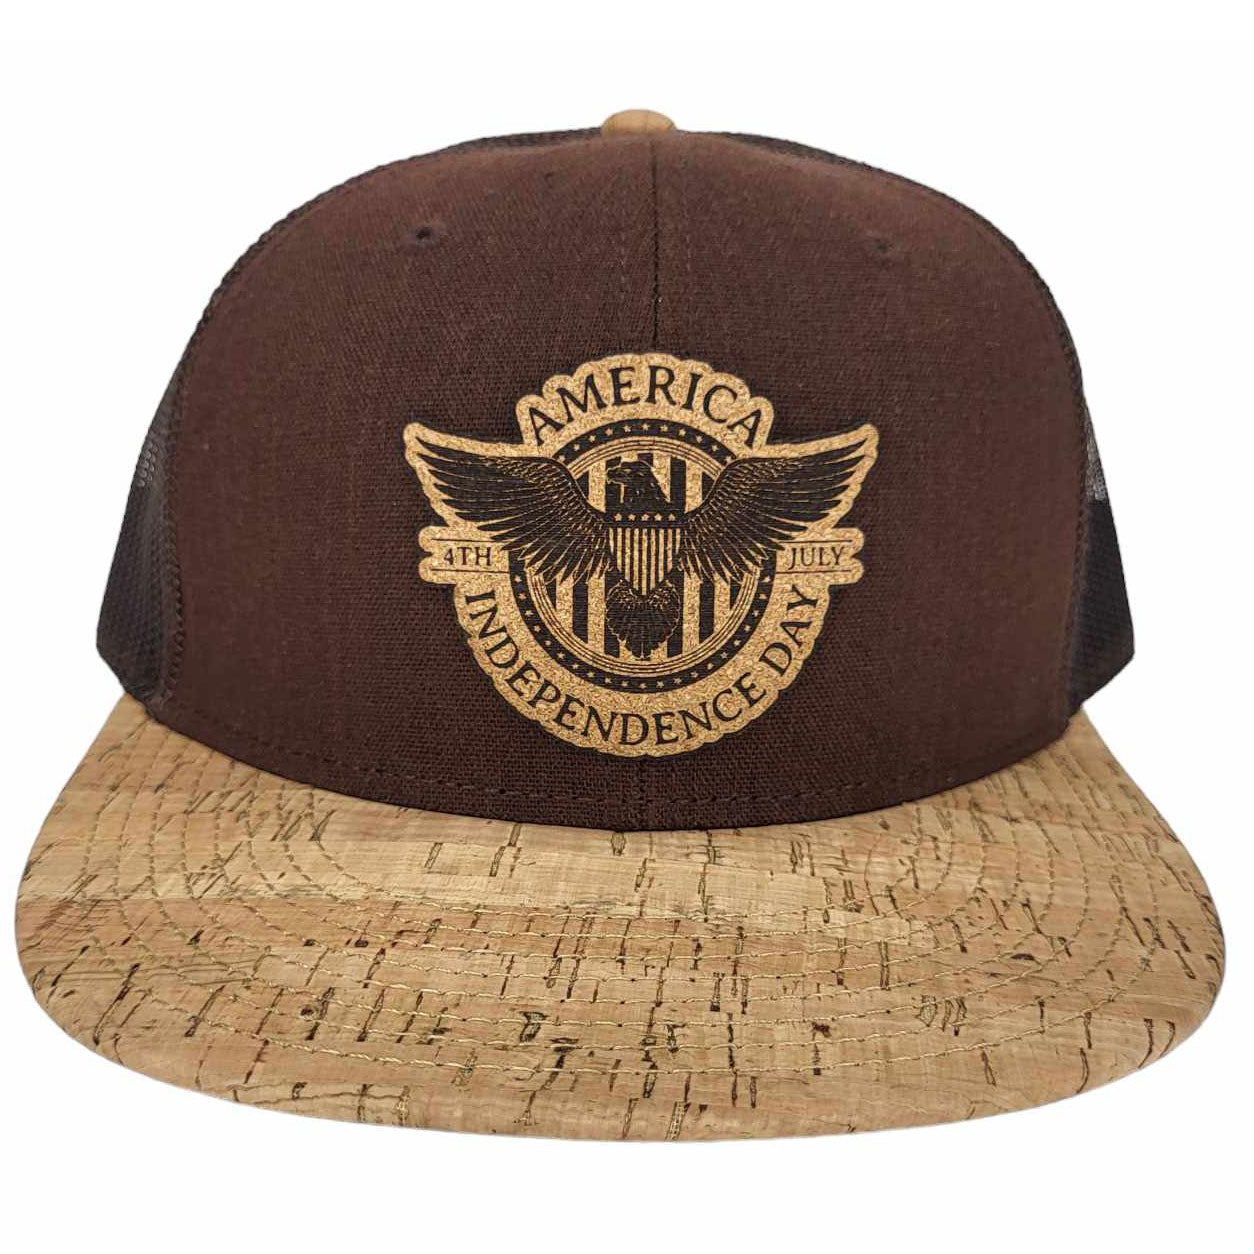 The Independence Day Cork Hat